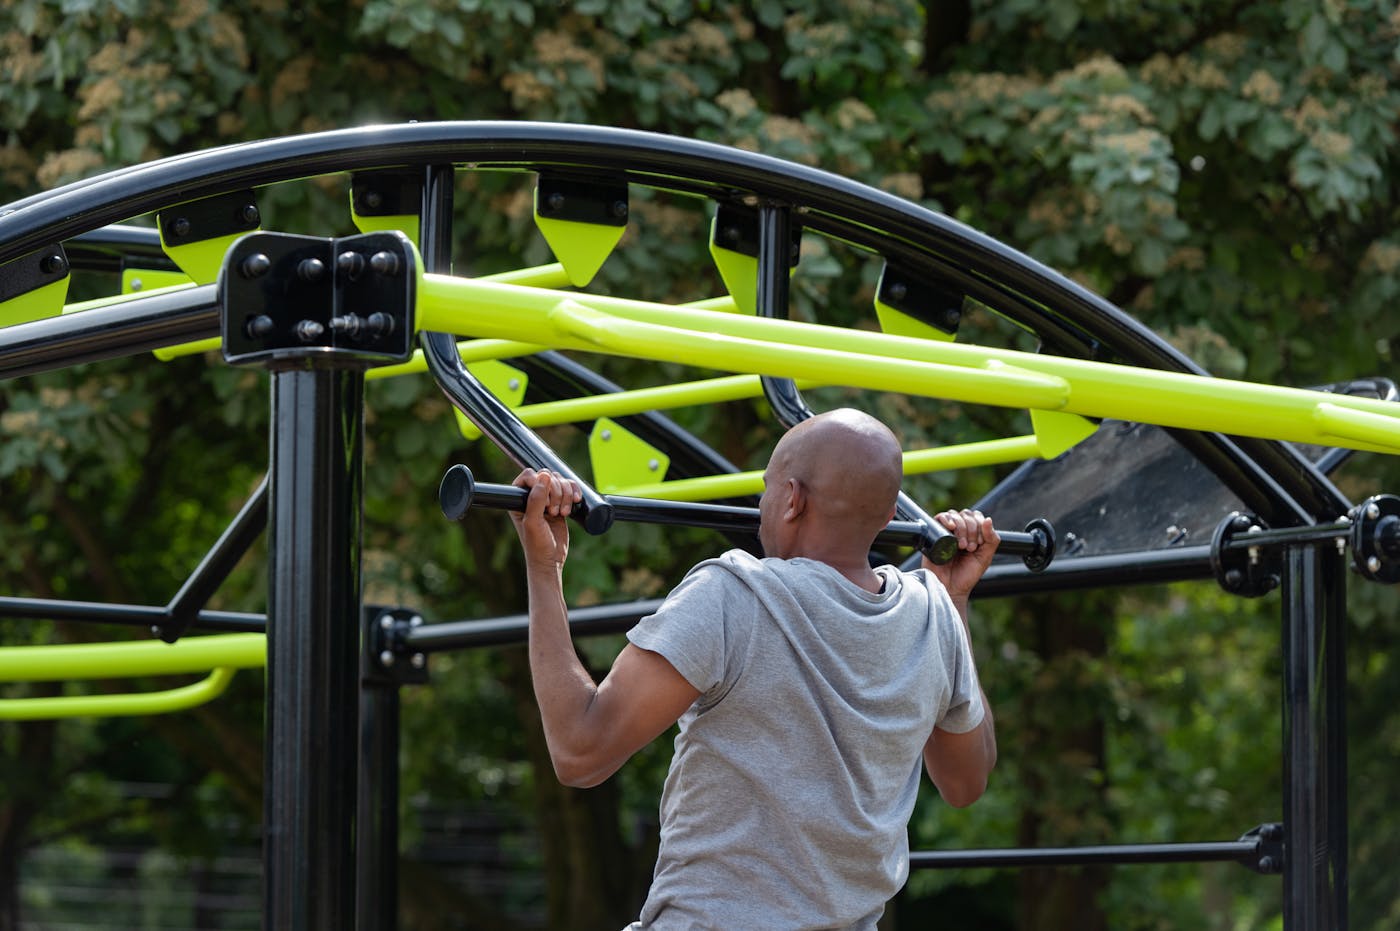 a man lifting weights on a playground